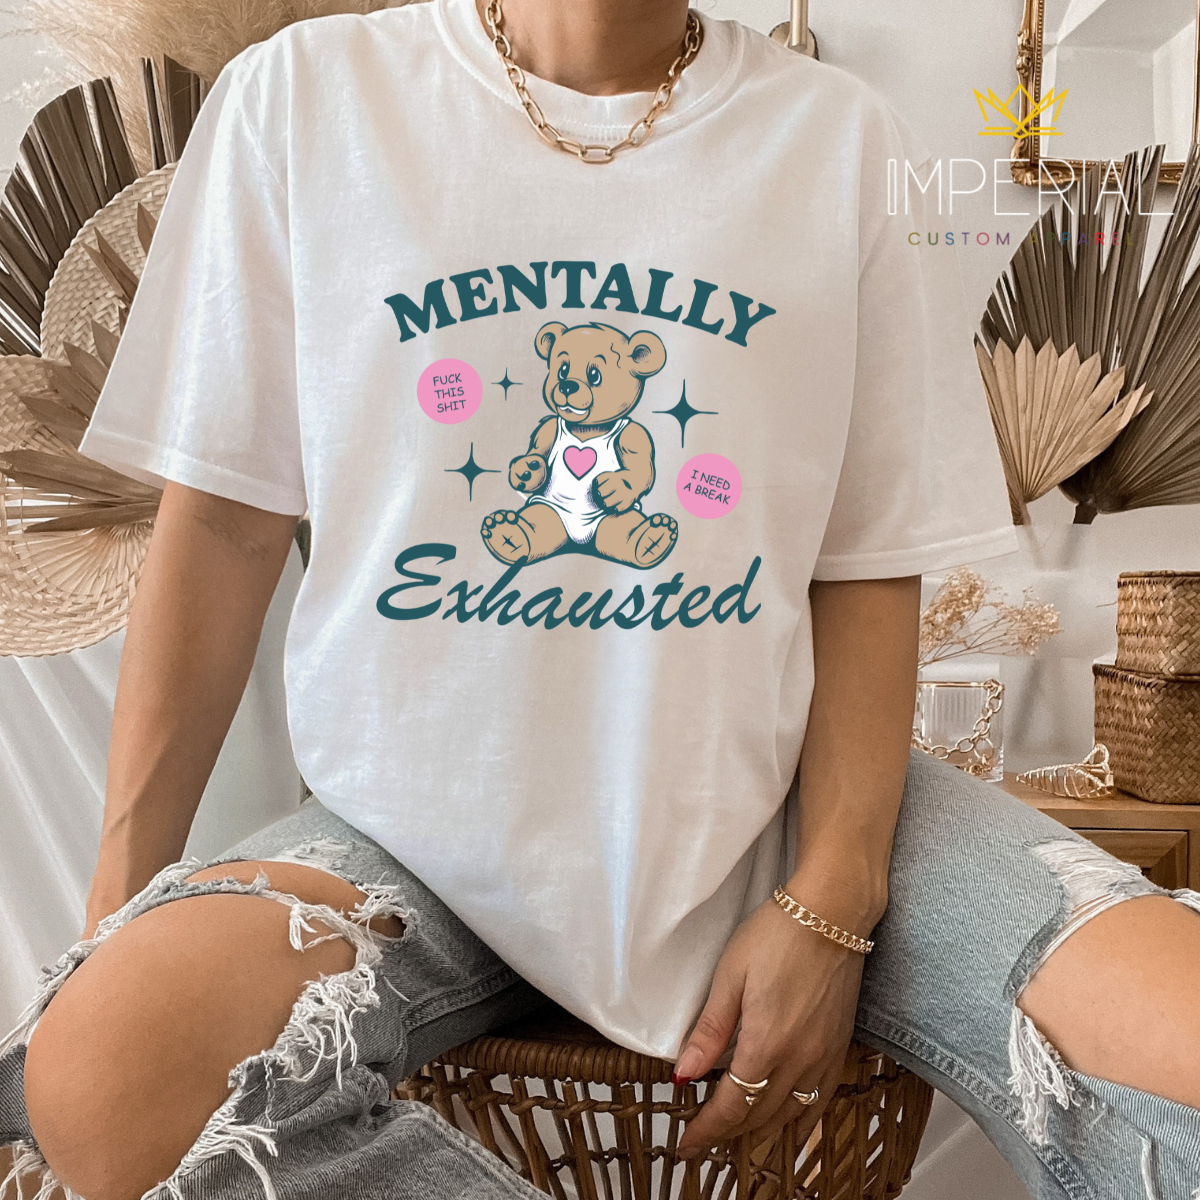 Mentally Exhausted